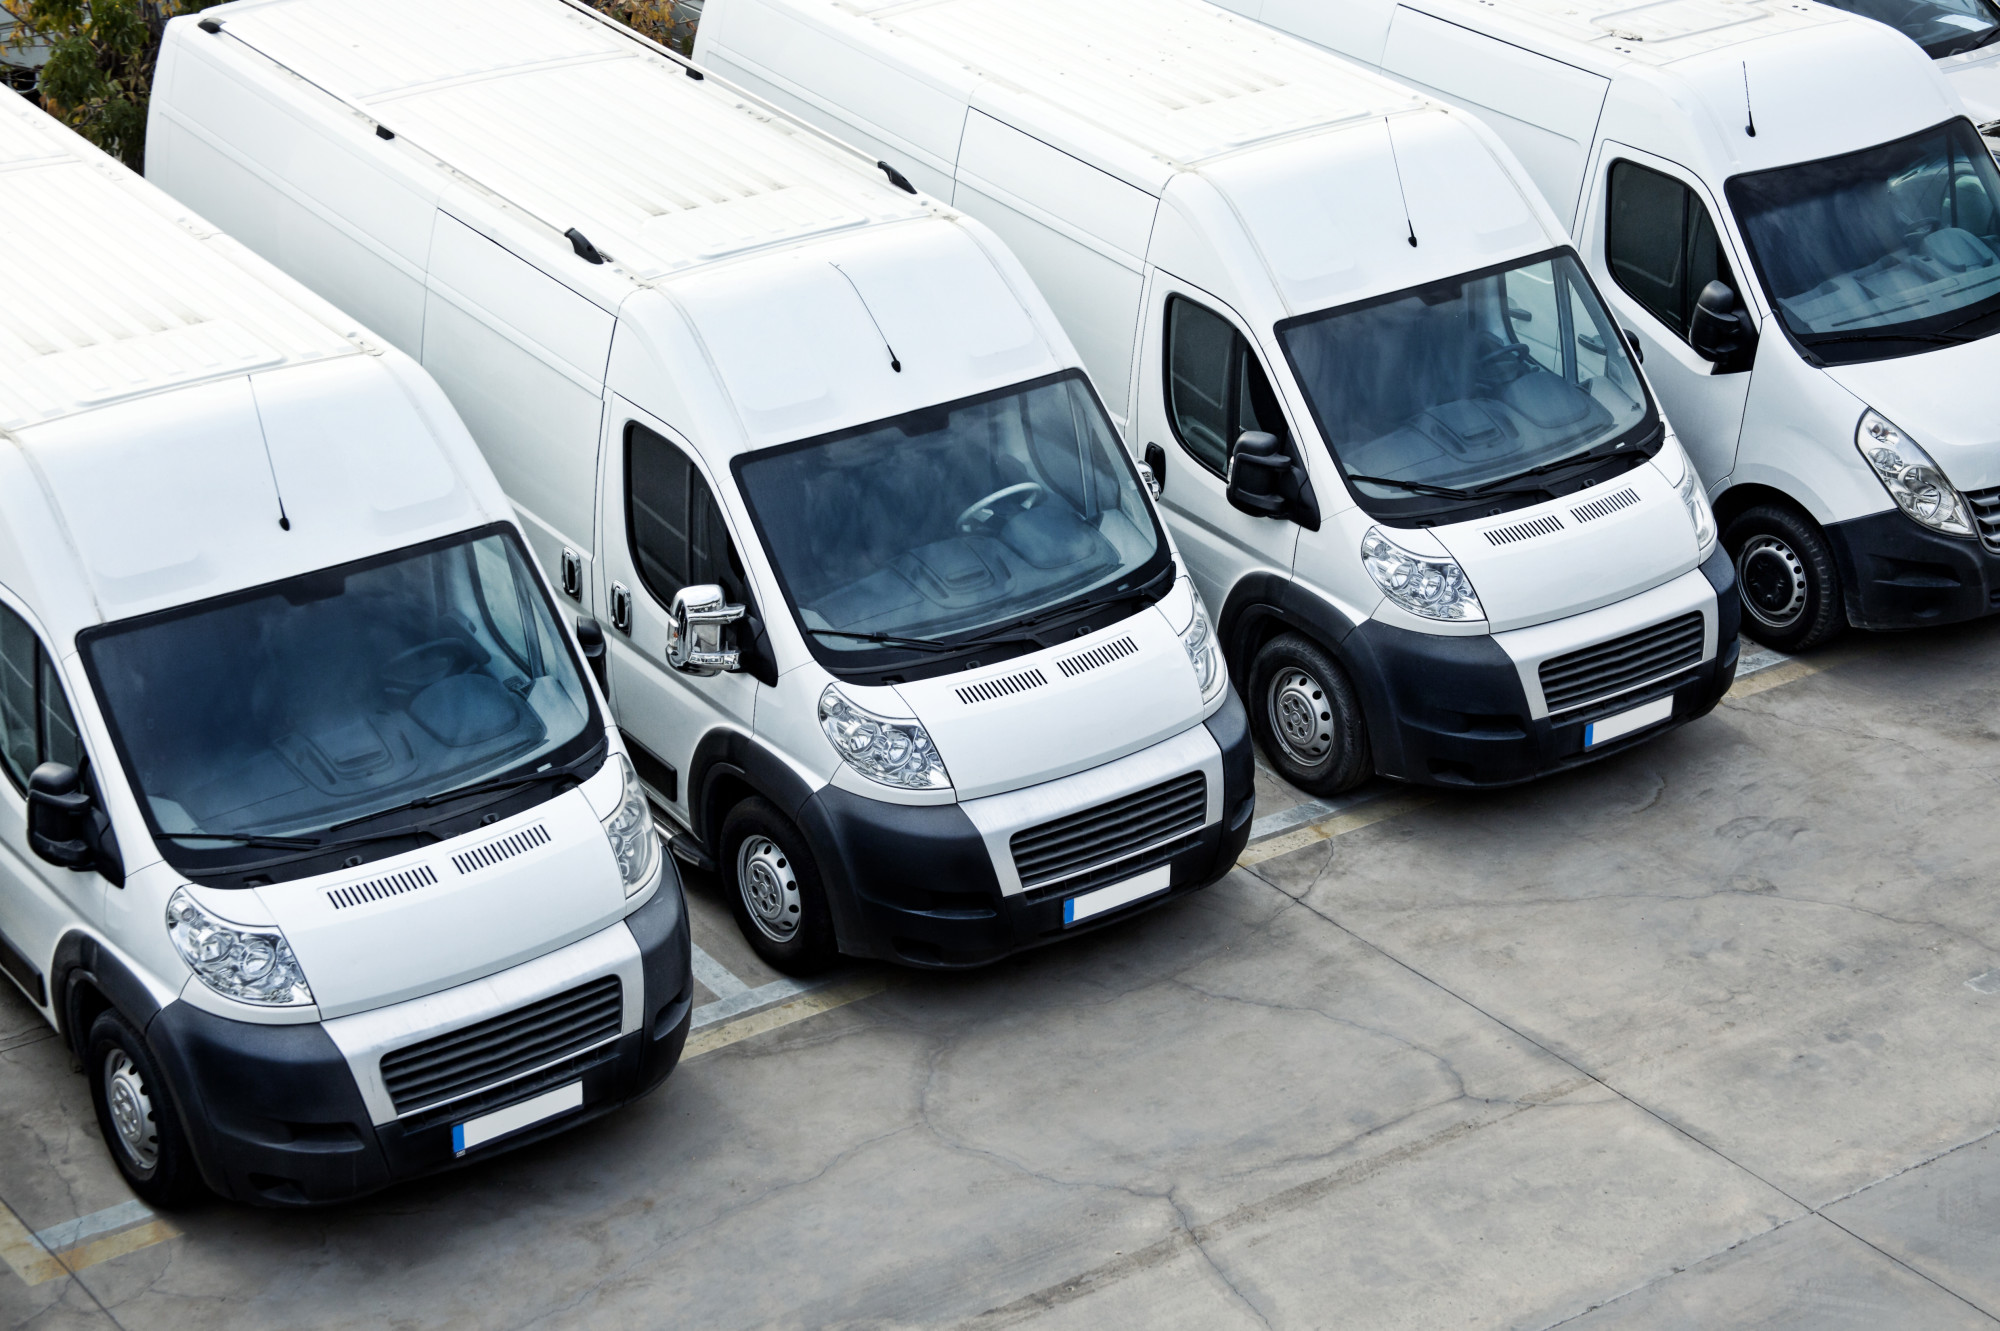 How to Increase Fleet Safety: A Guide for Fleet Managers